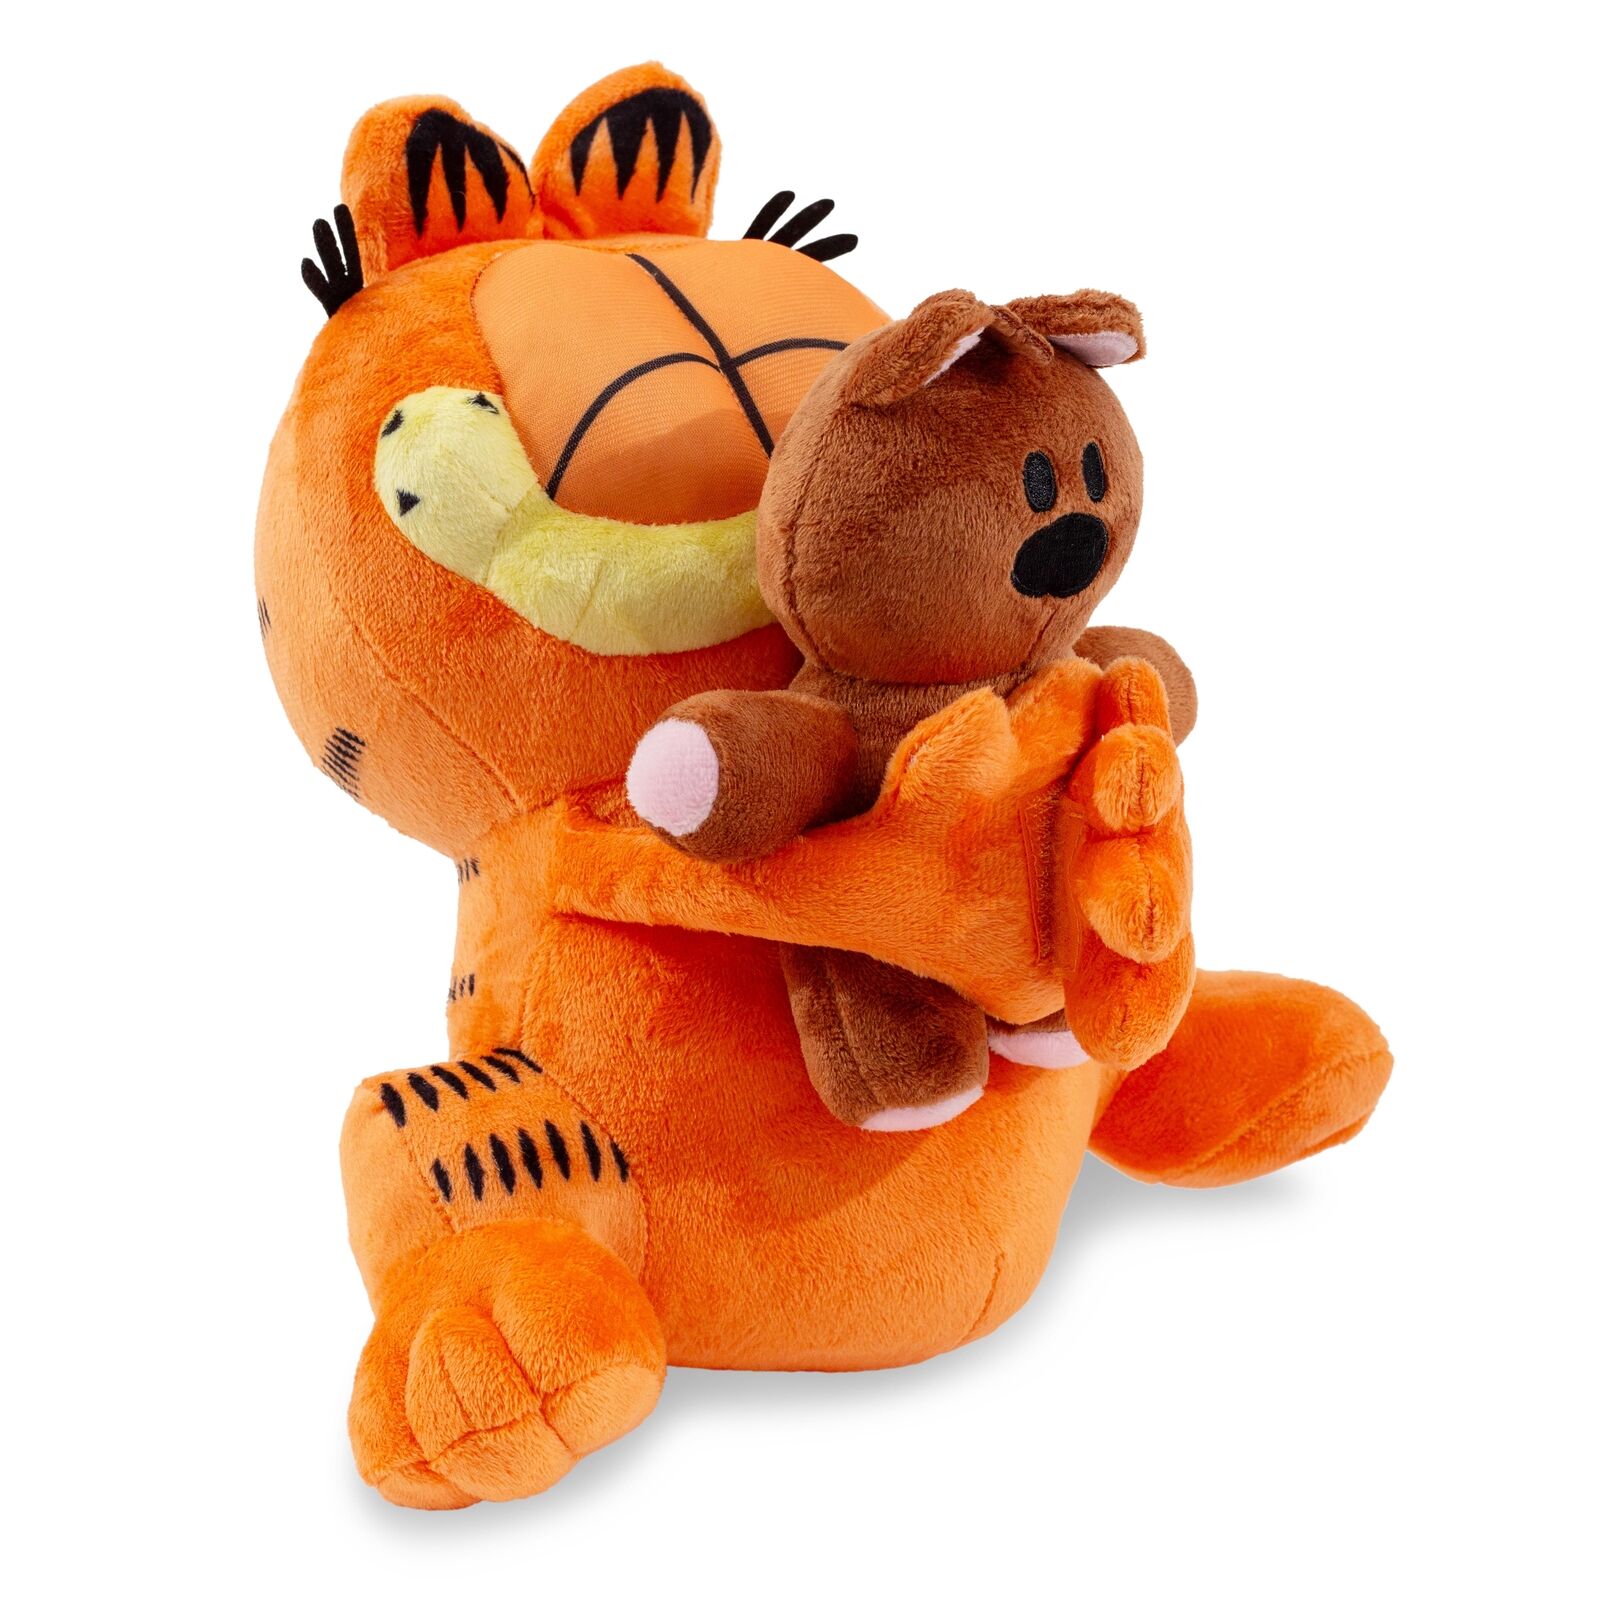 Garfield Holding Pooky 12-Inch Collector Plush Toy